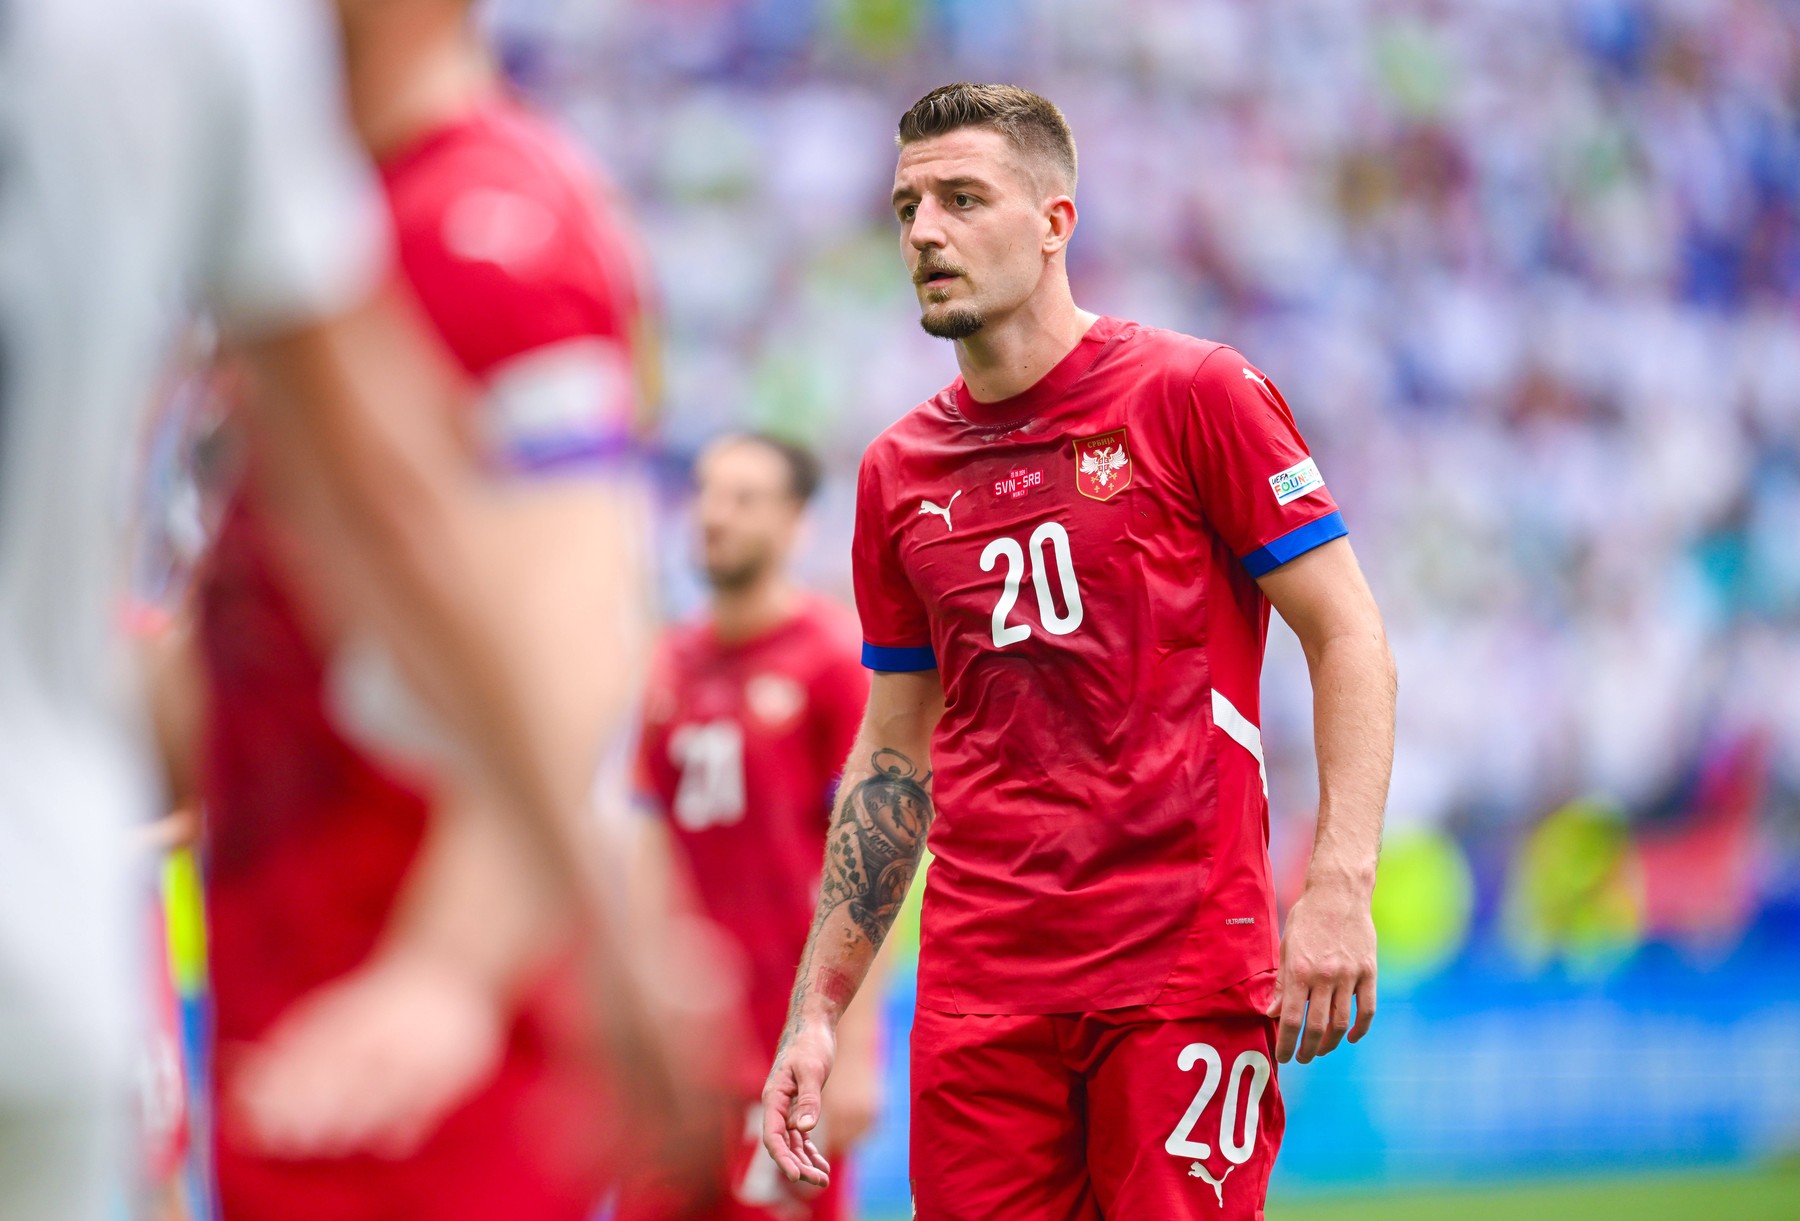 Sergej Milinkovic-Savic Serbia schaut zu, UEFA EURO 2024 - Group C, Slovenia vs Serbia, Fussball Arena Muenchen am 20. June 2024 in Muenchen, Deutschland. Foto von Sergej Milinkovic-Savic Serbia looks on, UEFA EURO 2024 - Group C, Slovenia vs Serbia, Munich Football Arena on June 20, 2024 in Munich, Germany. Photo by Defodi-738_738_SVNSRB_20240620_206 *** Sergej Milinkovic Savic Serbia looks on, UEFA EURO 2024 Group C, Slovenia vs Serbia, Munich Football Arena on June 20, 2024 in Munich, Germany Photo by Sergej Milinkovic Savic Serbia looks on, UEFA EURO 2024 Group C, Slovenia vs Serbia, Munich Football Arena on June 20, 2024 in Munich, German Defodi-738,Image: 883319074, License: Rights-managed, Restrictions: imago is entitled to issue a simple usage license at the time of provision. Personality and trademark rights as well as copyright laws regarding art-works shown must be observed. Commercial use at your own risk., Credit images as "Profimedia/ IMAGO", Model Release: no, Credit line: Silas Schueller/DeFodi Images / imago stock&people / Profimedia